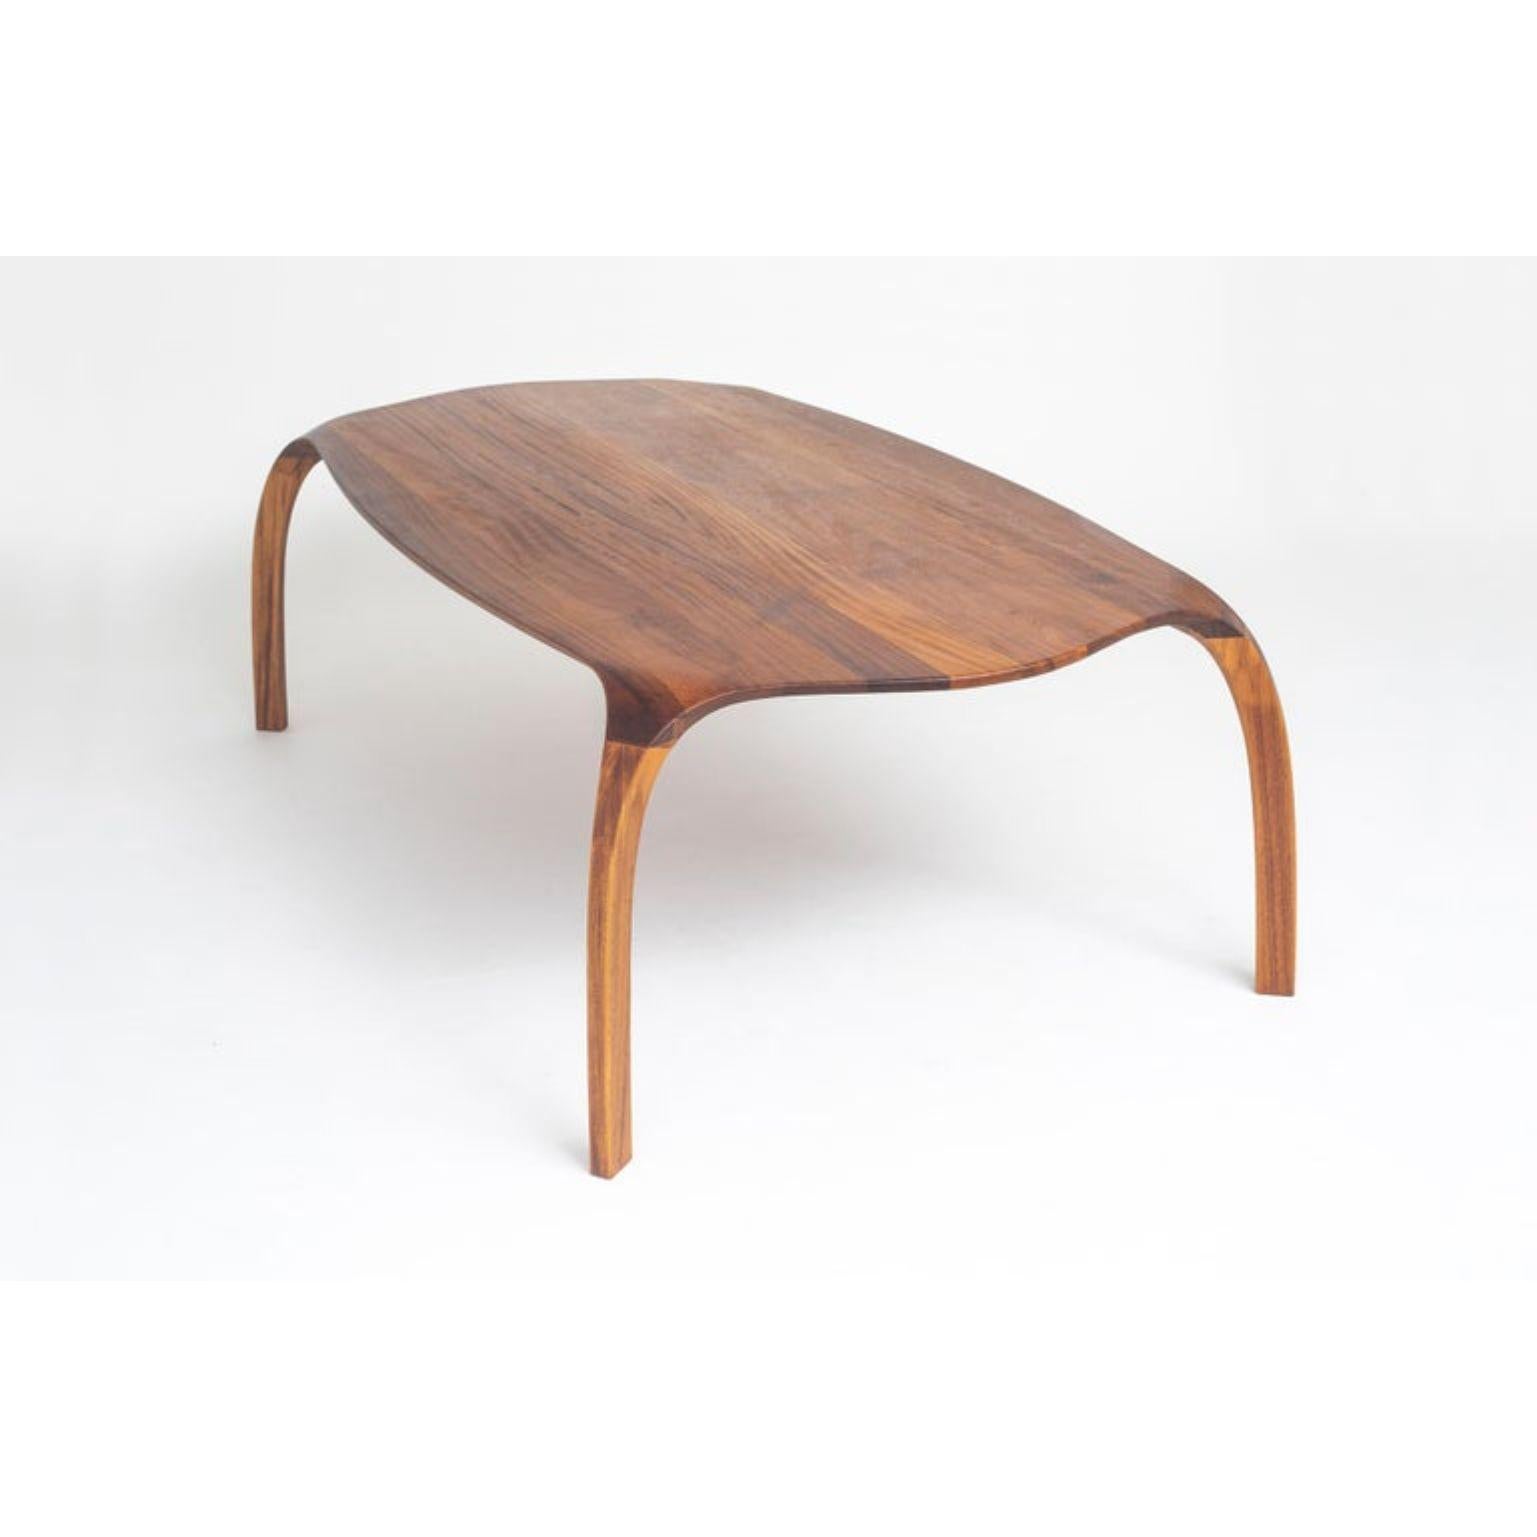 Kaona dining table by Henka Lab
Limited Edition
Dimensions: H 75 x W 122 x L 240 cm
Materials: solid Iroko wood, oil, natural wax finish
Weight: 80 Kg

Series limited to 100 signed and numbered copies. 

Kaona table arises as an